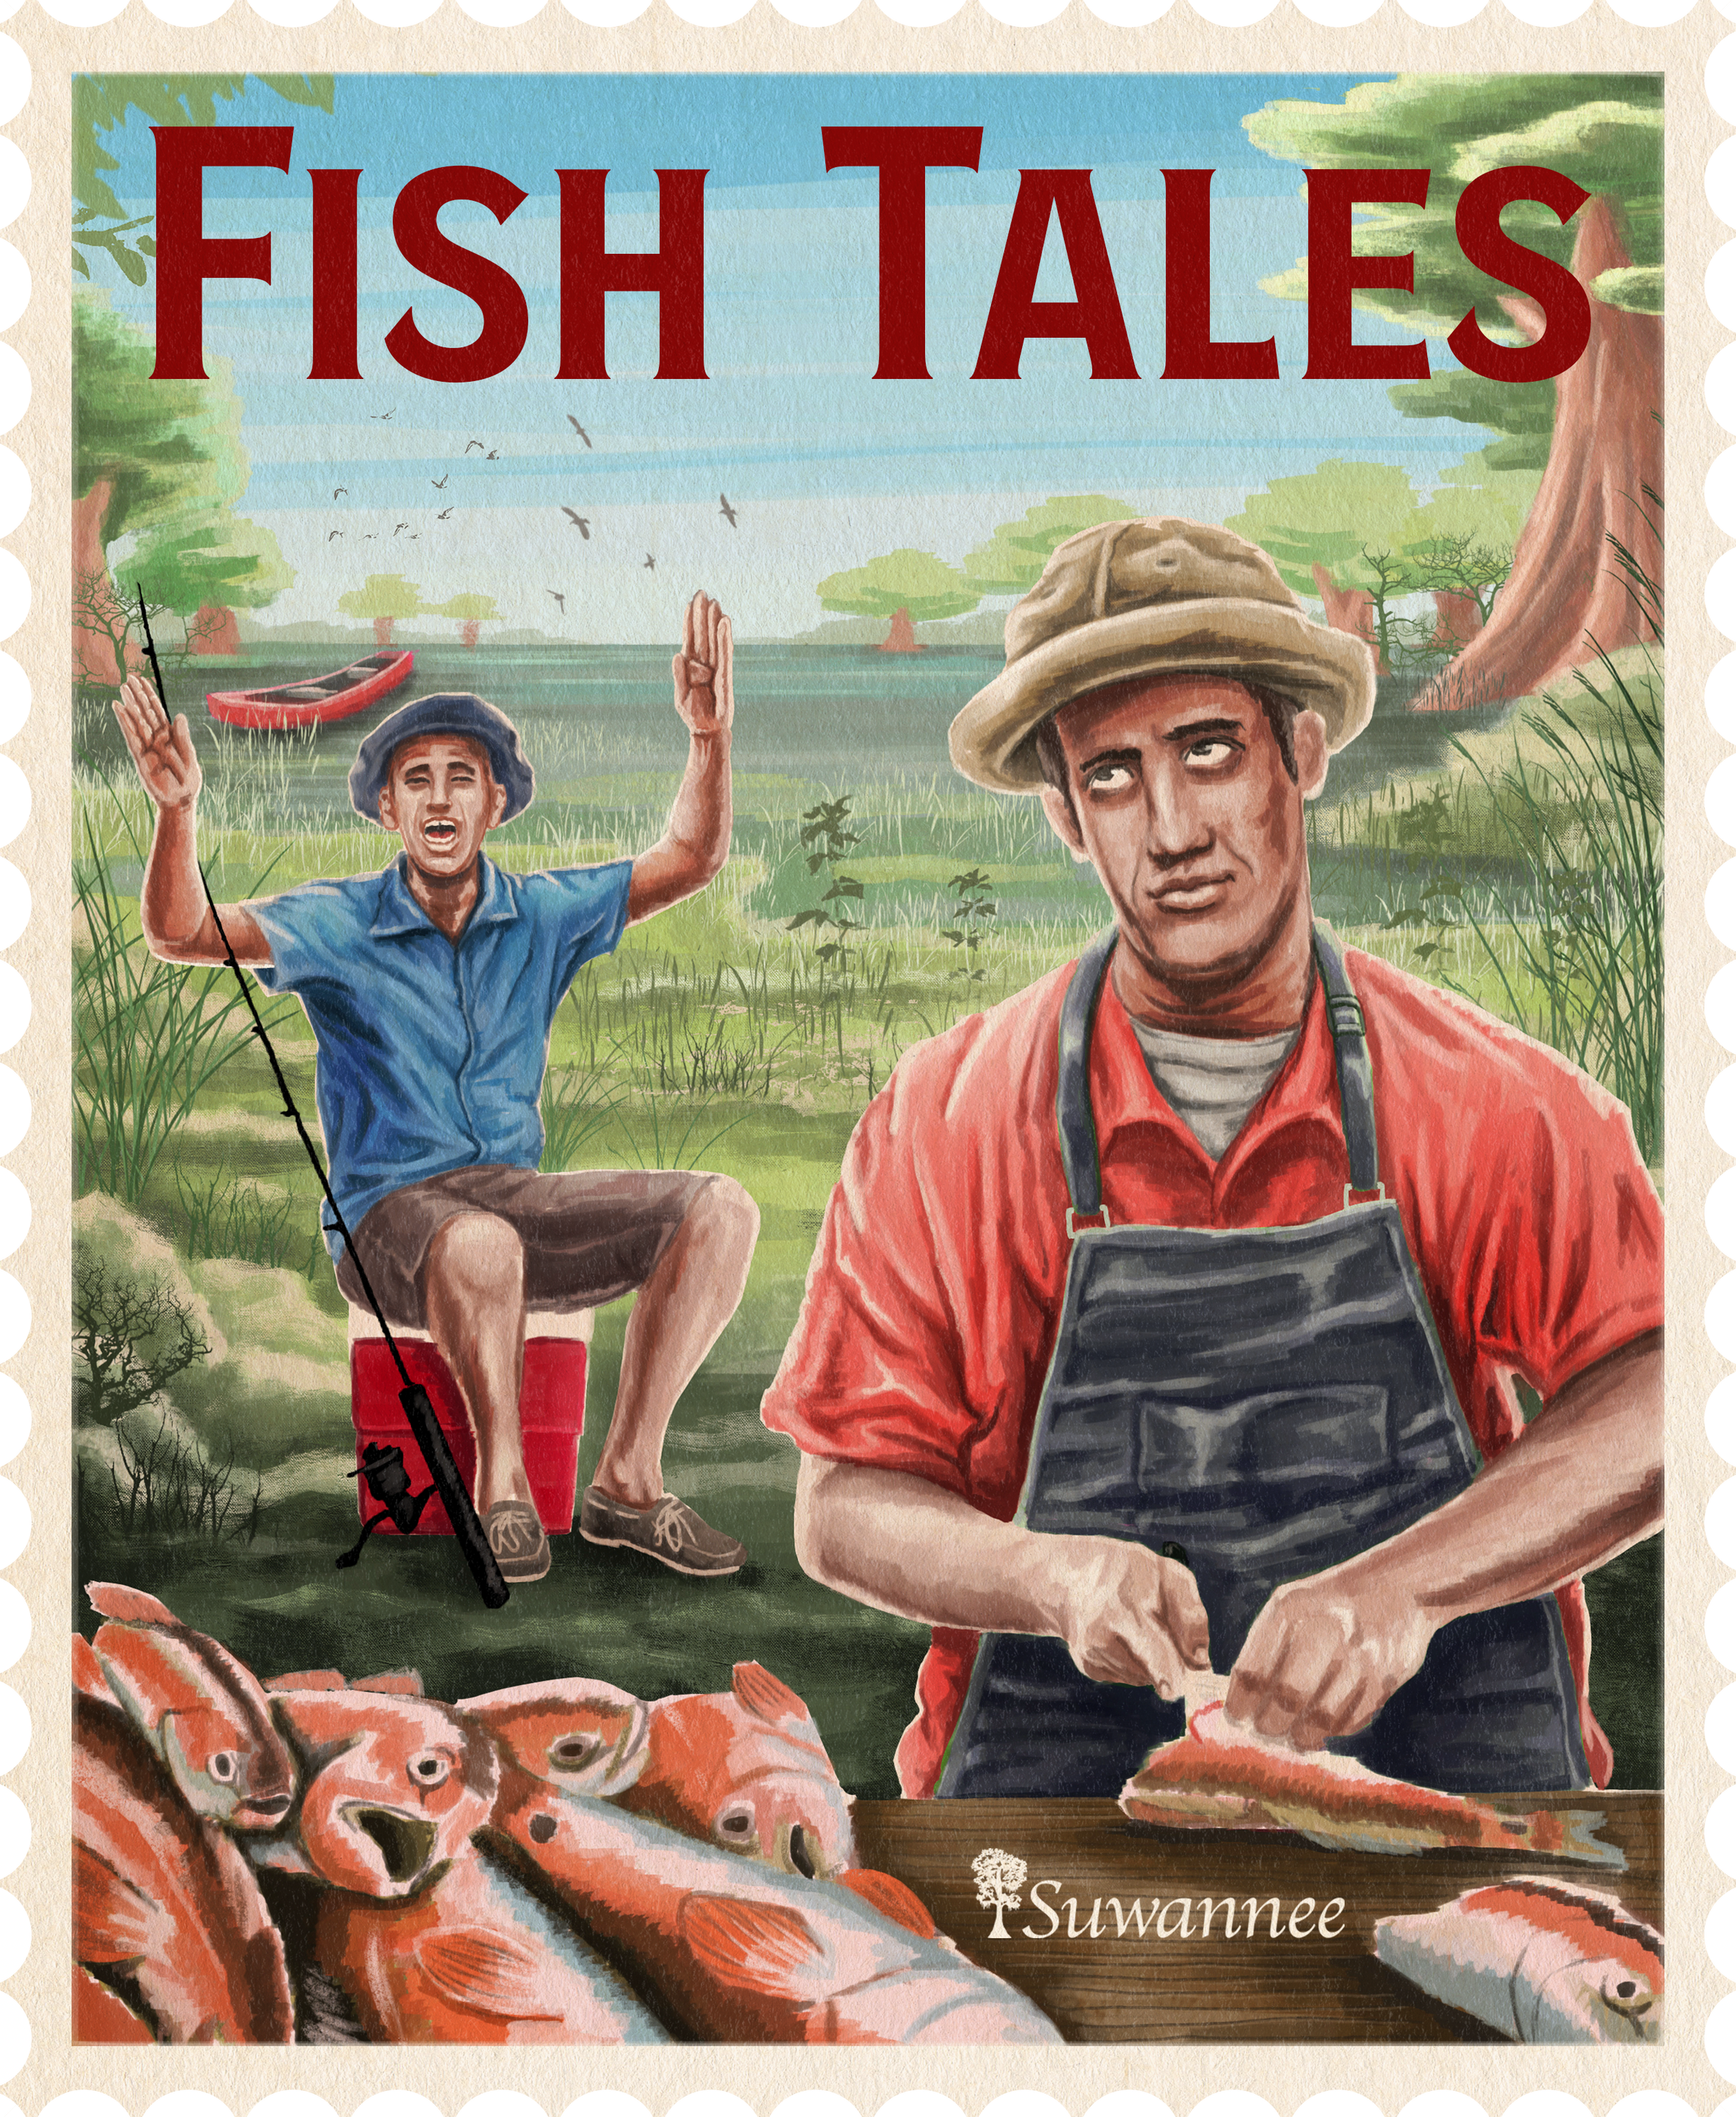 Stamp image of two guys at fishing camp, one working, one lying about the size of his fish. Titled Fish Tales. With Suwannee Brand Apparel logo at bottom